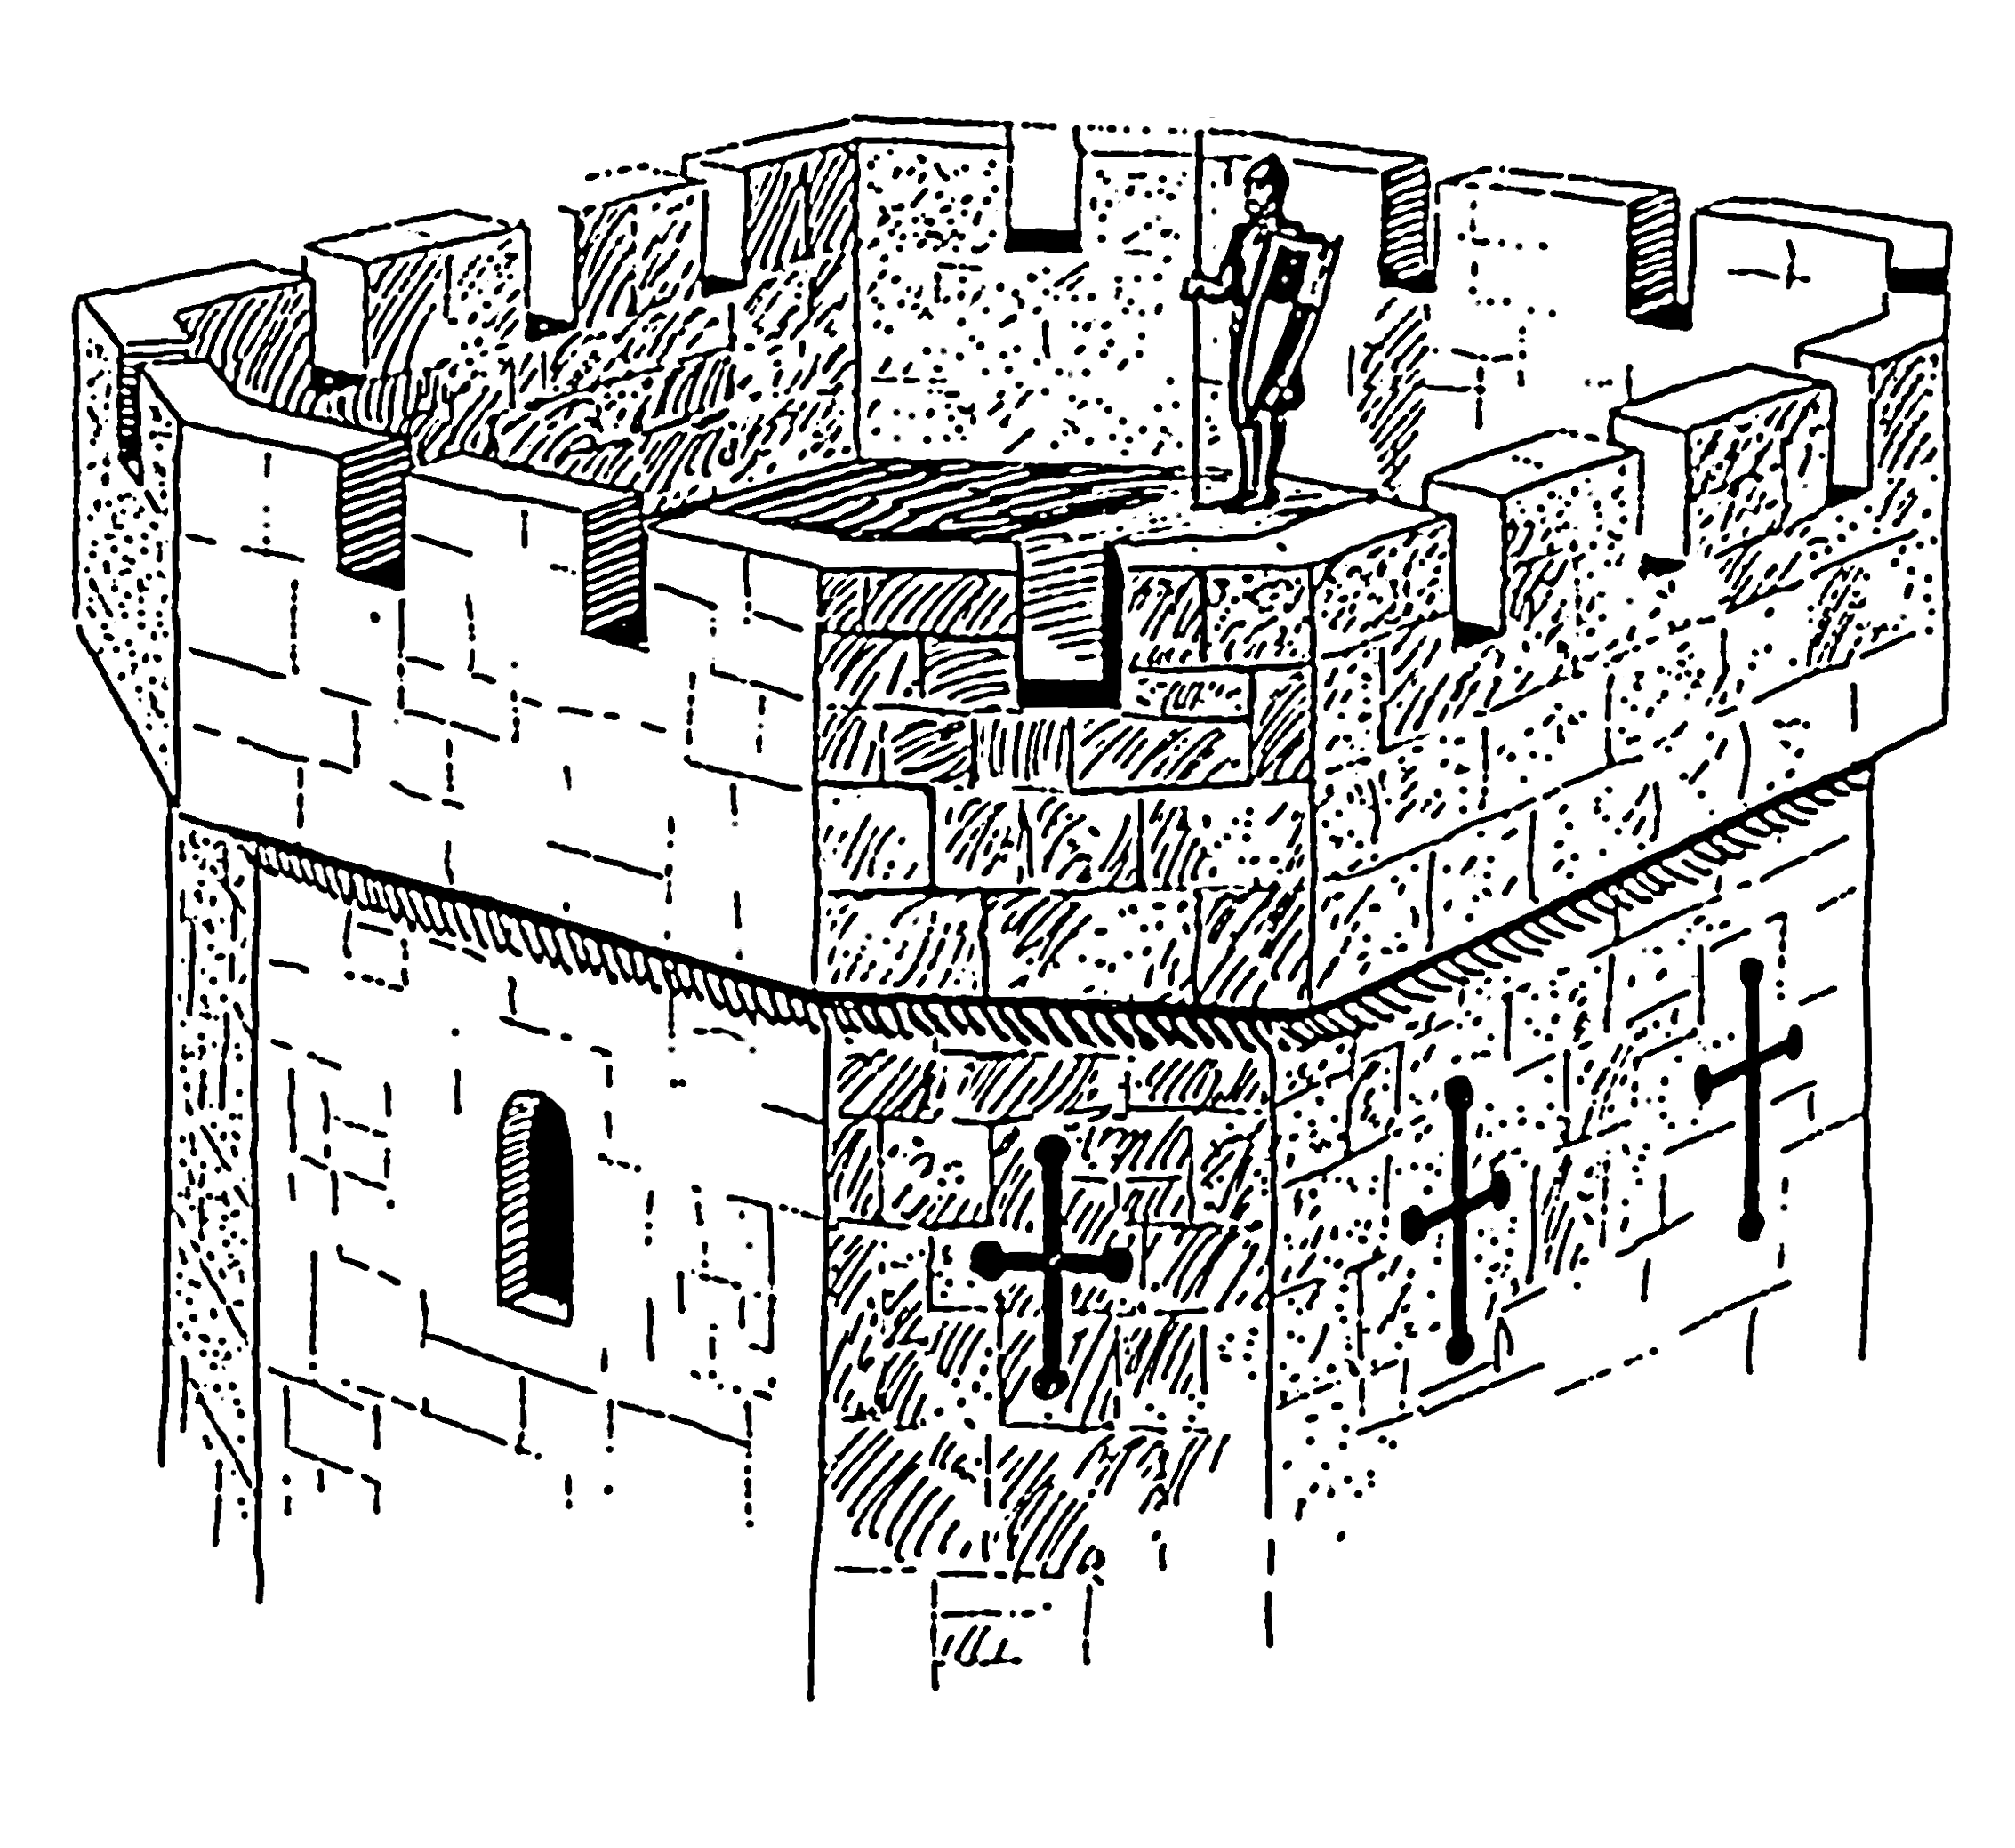 File:Battlement (PSF).png - Wikimedia Commons